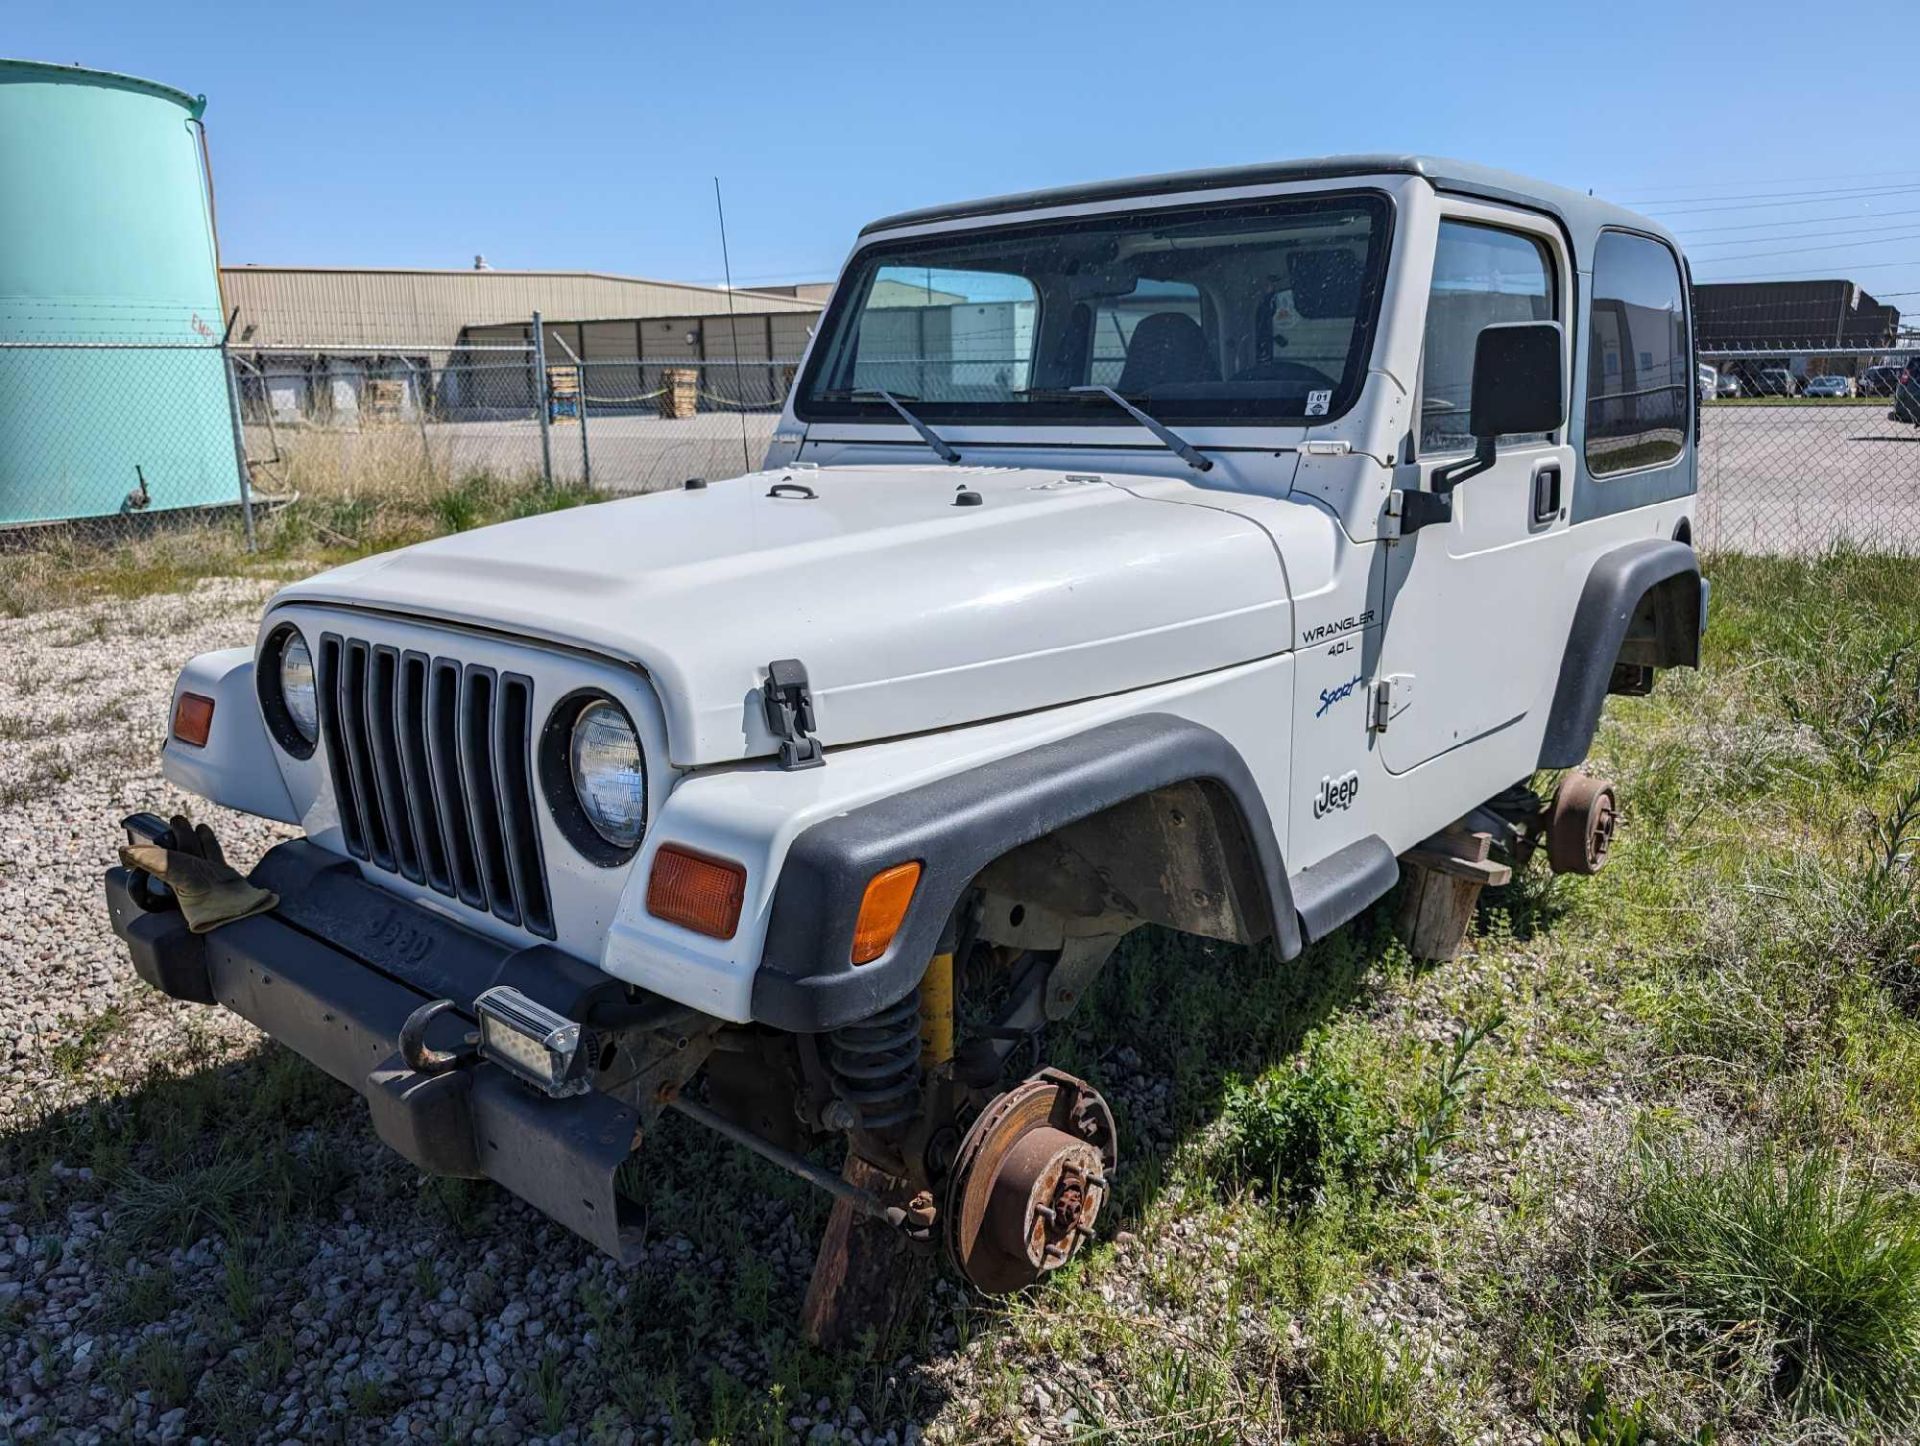 1998 Jeep Wrangler Sport 4wd, v6 VIN #: 1J4FY19S6WP712195 Features and Notes: currently not running. - Image 3 of 13